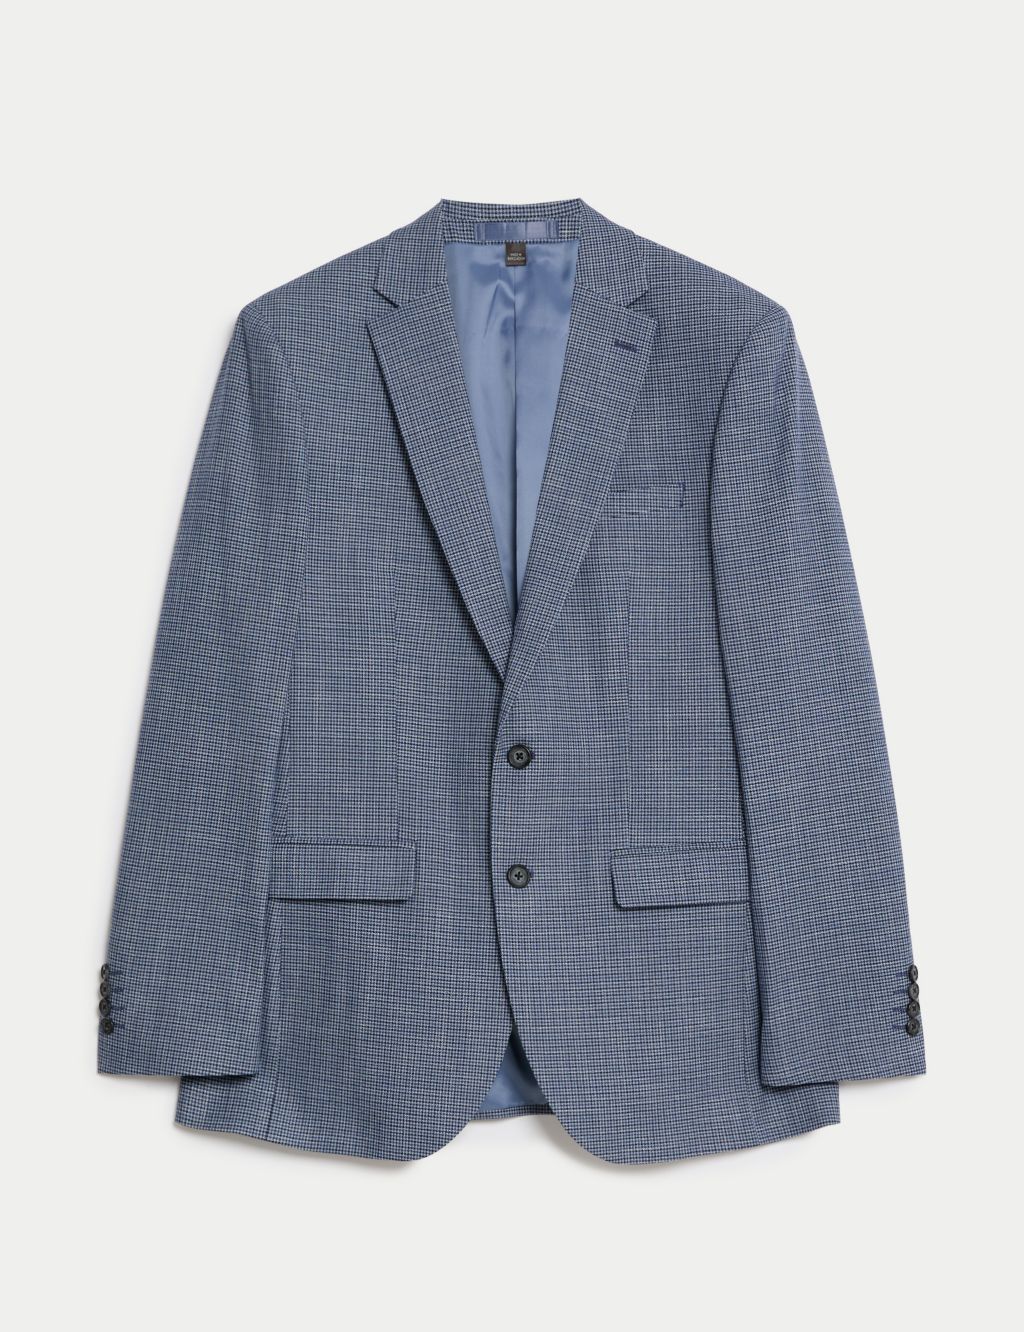 Slim Fit Puppytooth Stretch Suit Jacket image 1